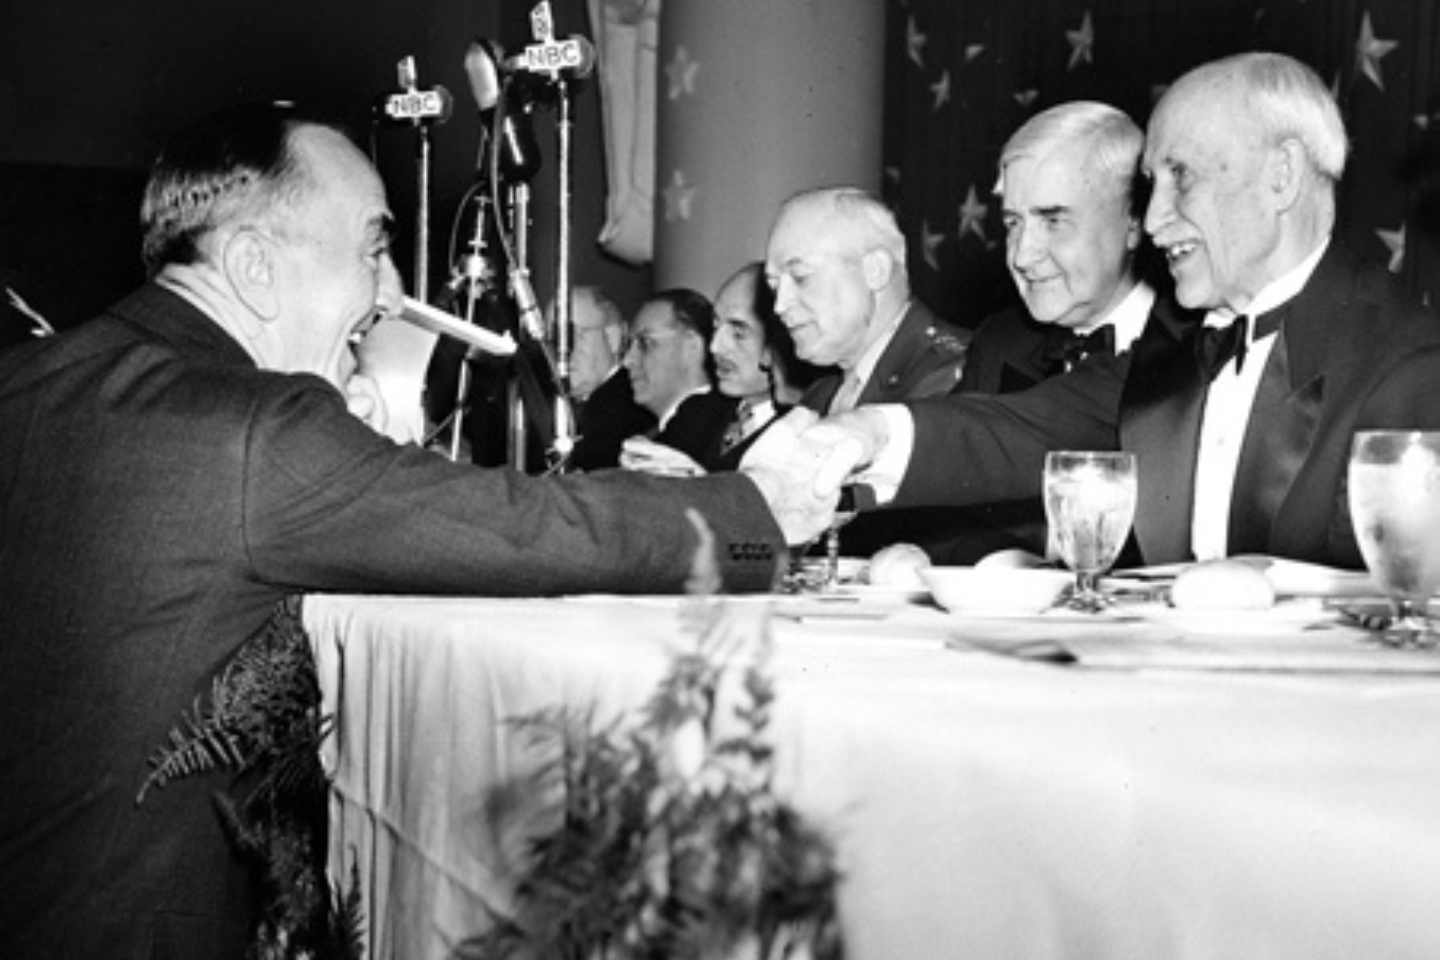 Captain Eddie Rickenbacker shakes hands with Orville Wright